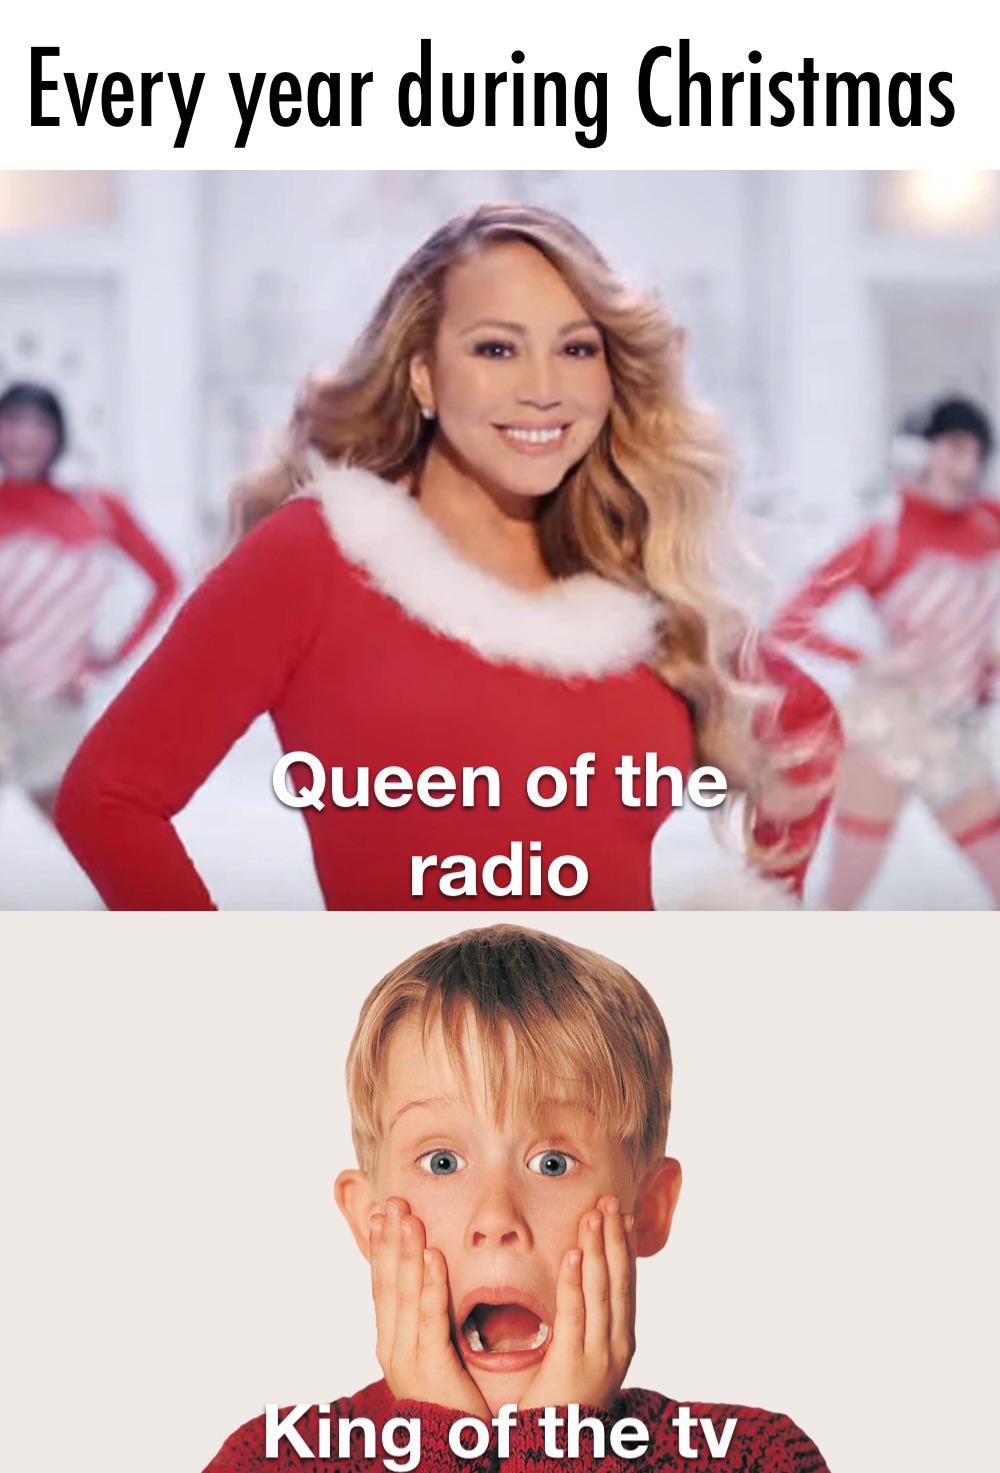 dank memes and funny pics - mariah carey memes christmas - Every year during Christmas Queen of the radio King of the tv Saray